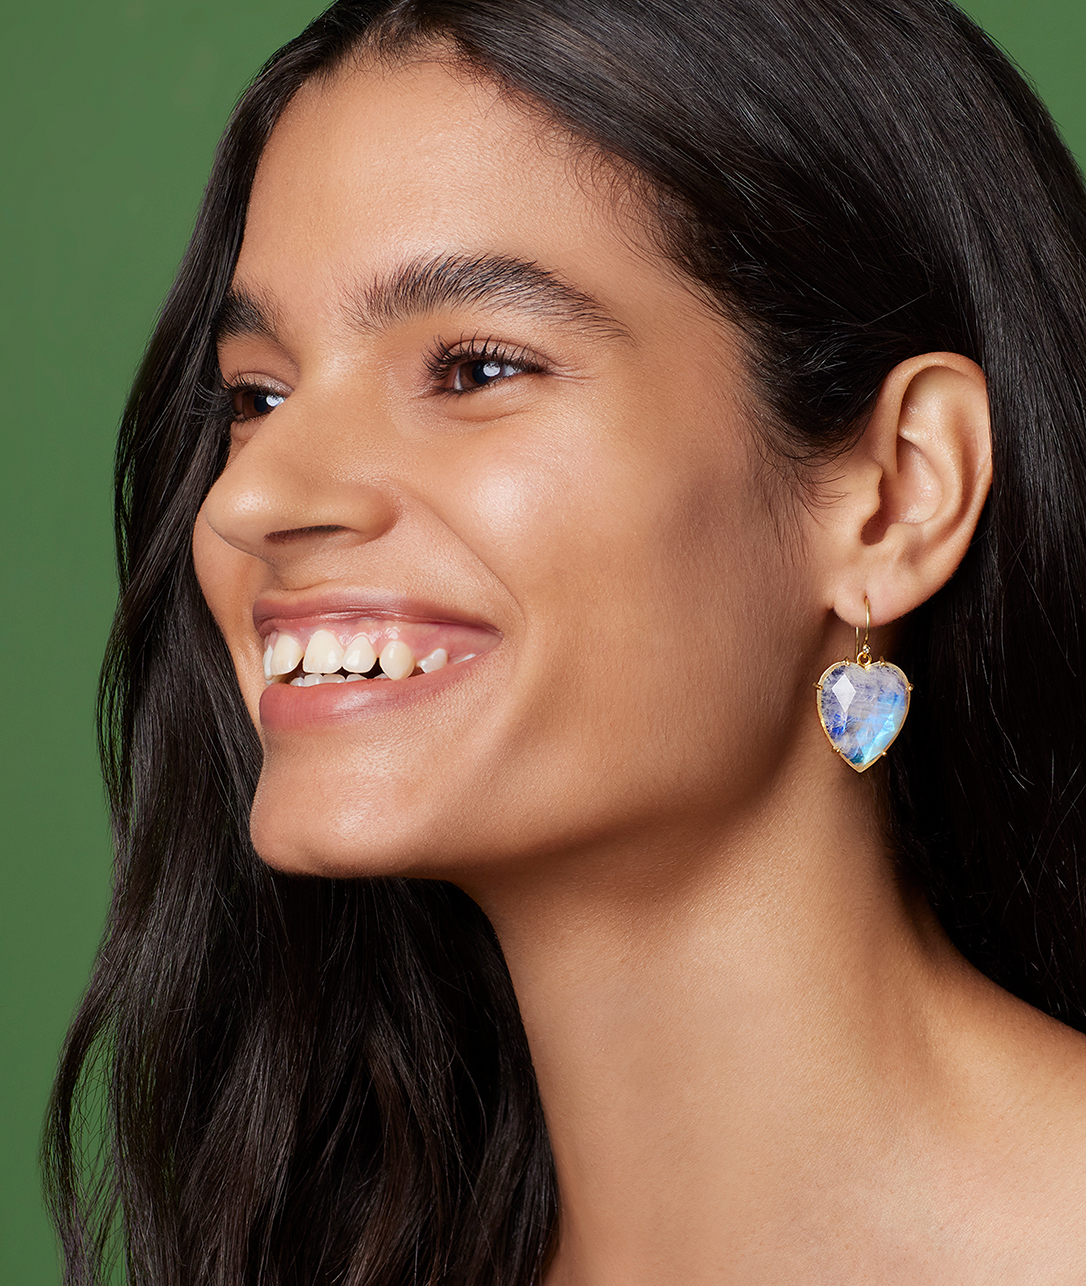                 For the hopeless romantic, a pair of Love Earrings really says it all.SHOP LOVE EARRINGS            